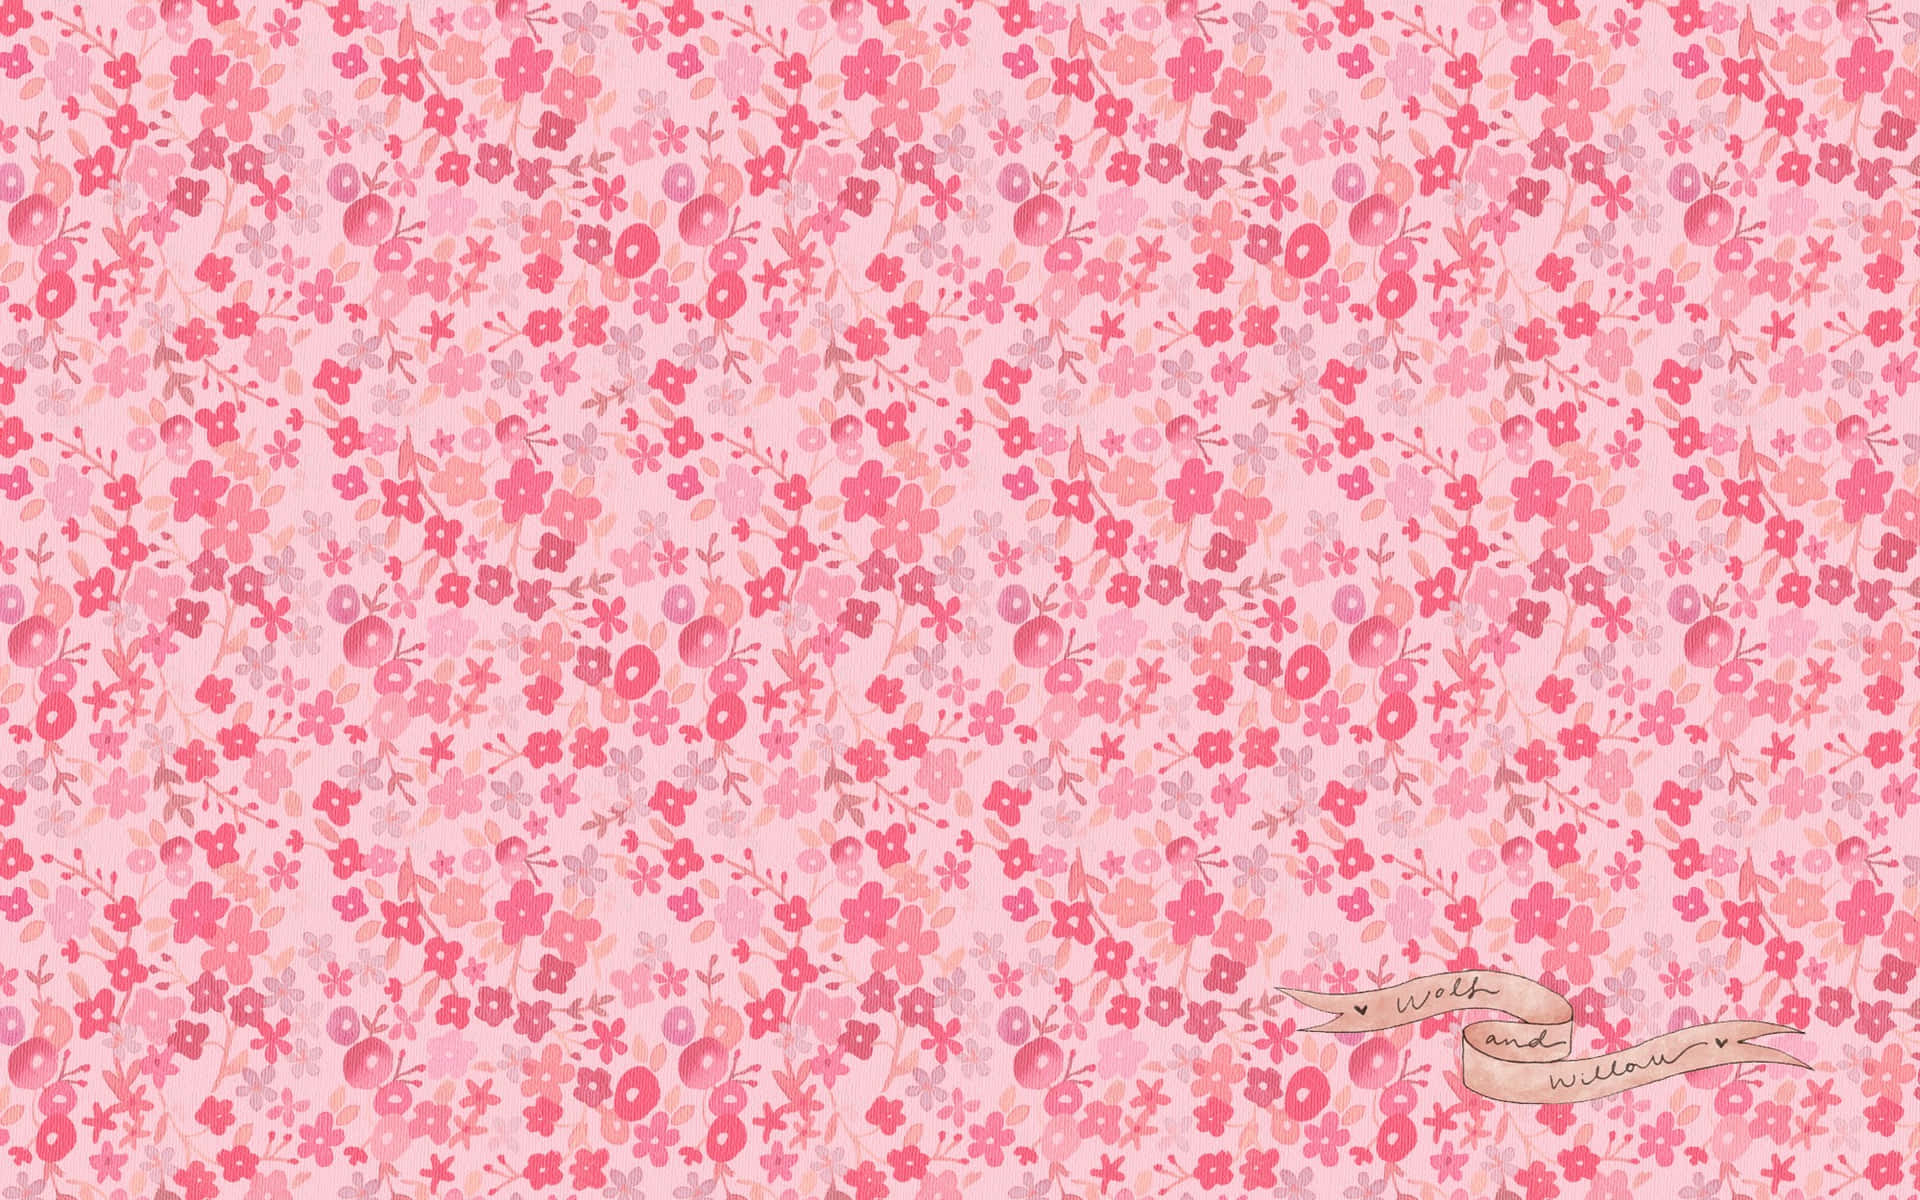 Be Cool and Stylish with a Girly Laptop Wallpaper